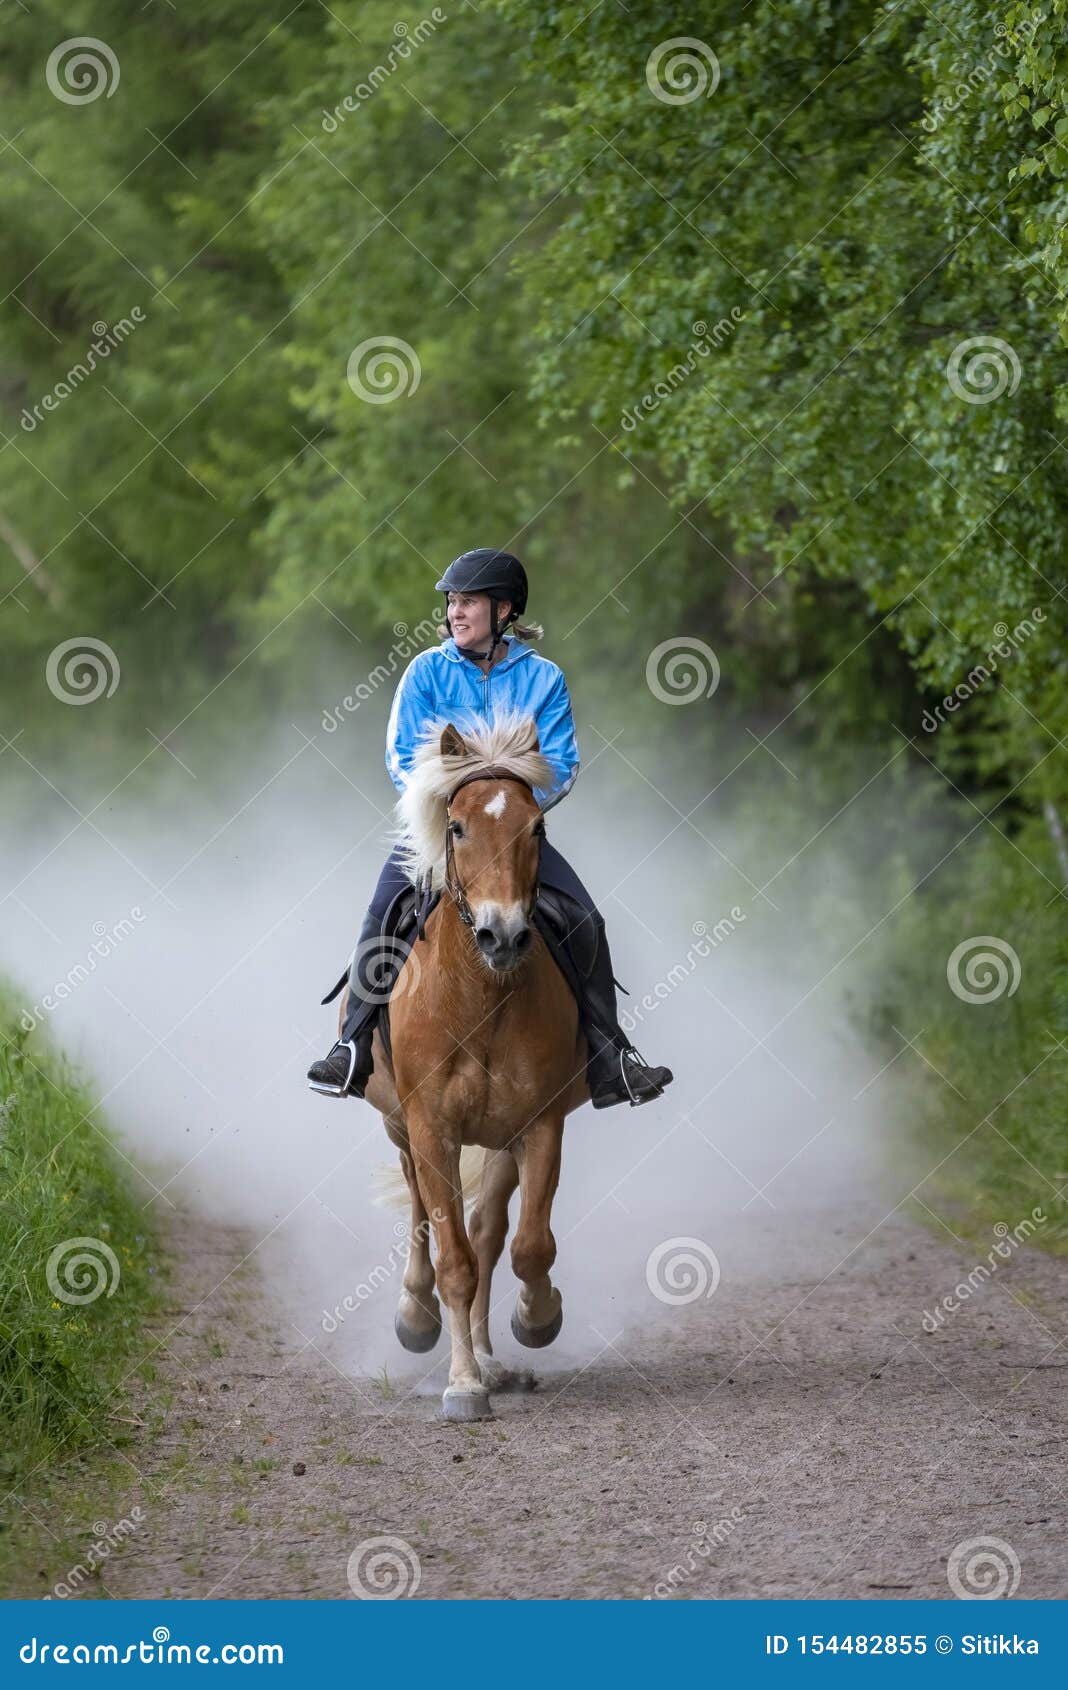 woman horseback riding in forest parth